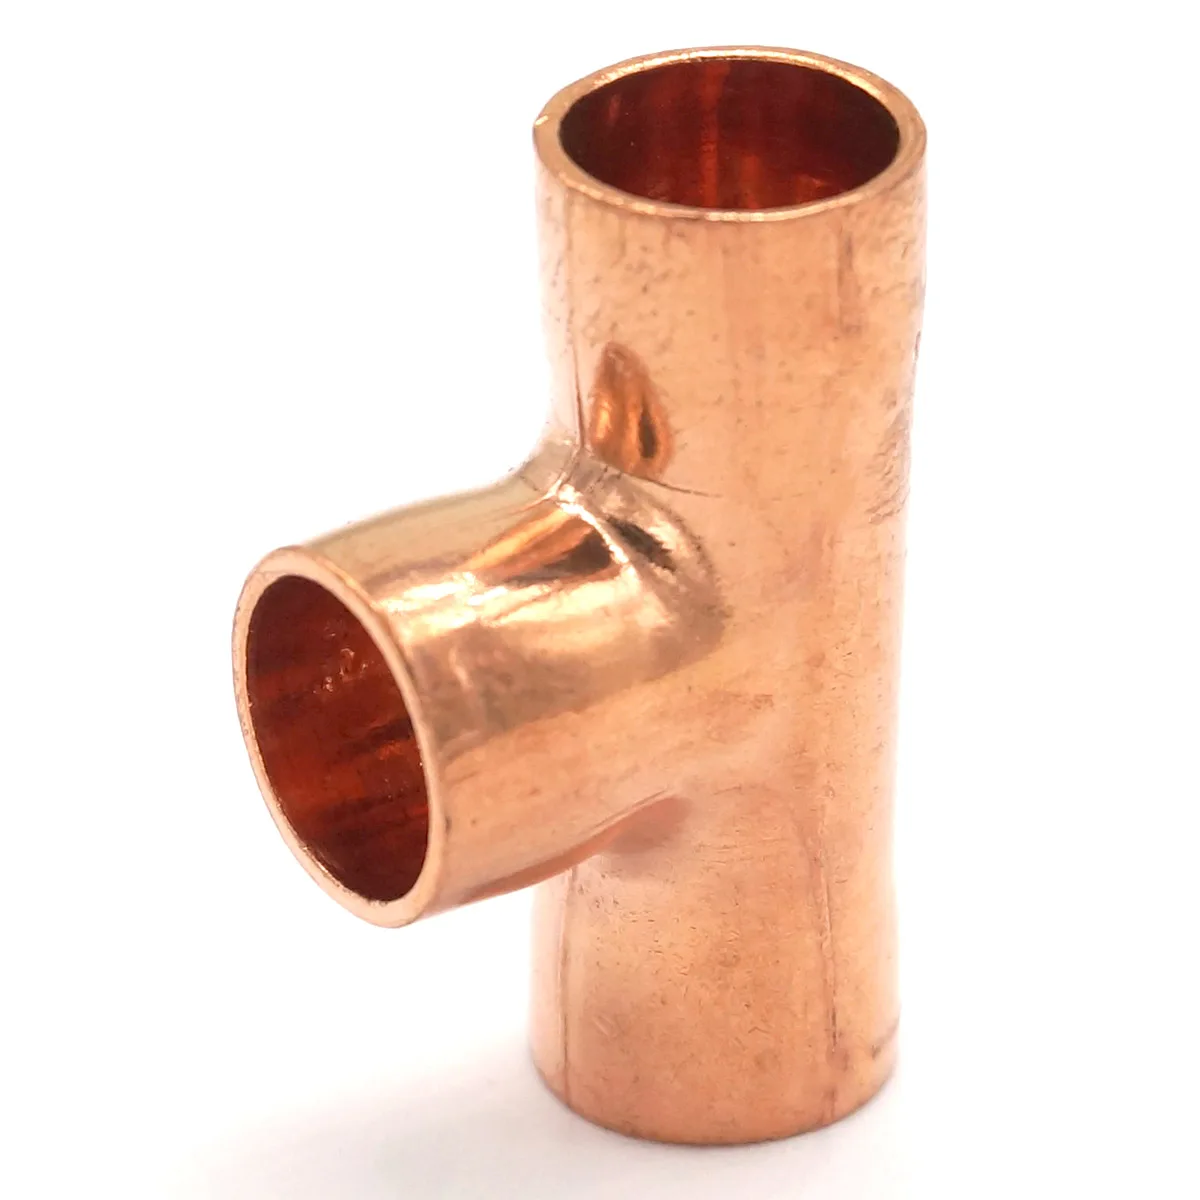 NEW 2 x END FEED copper plumbing pipe 15mm TEE 